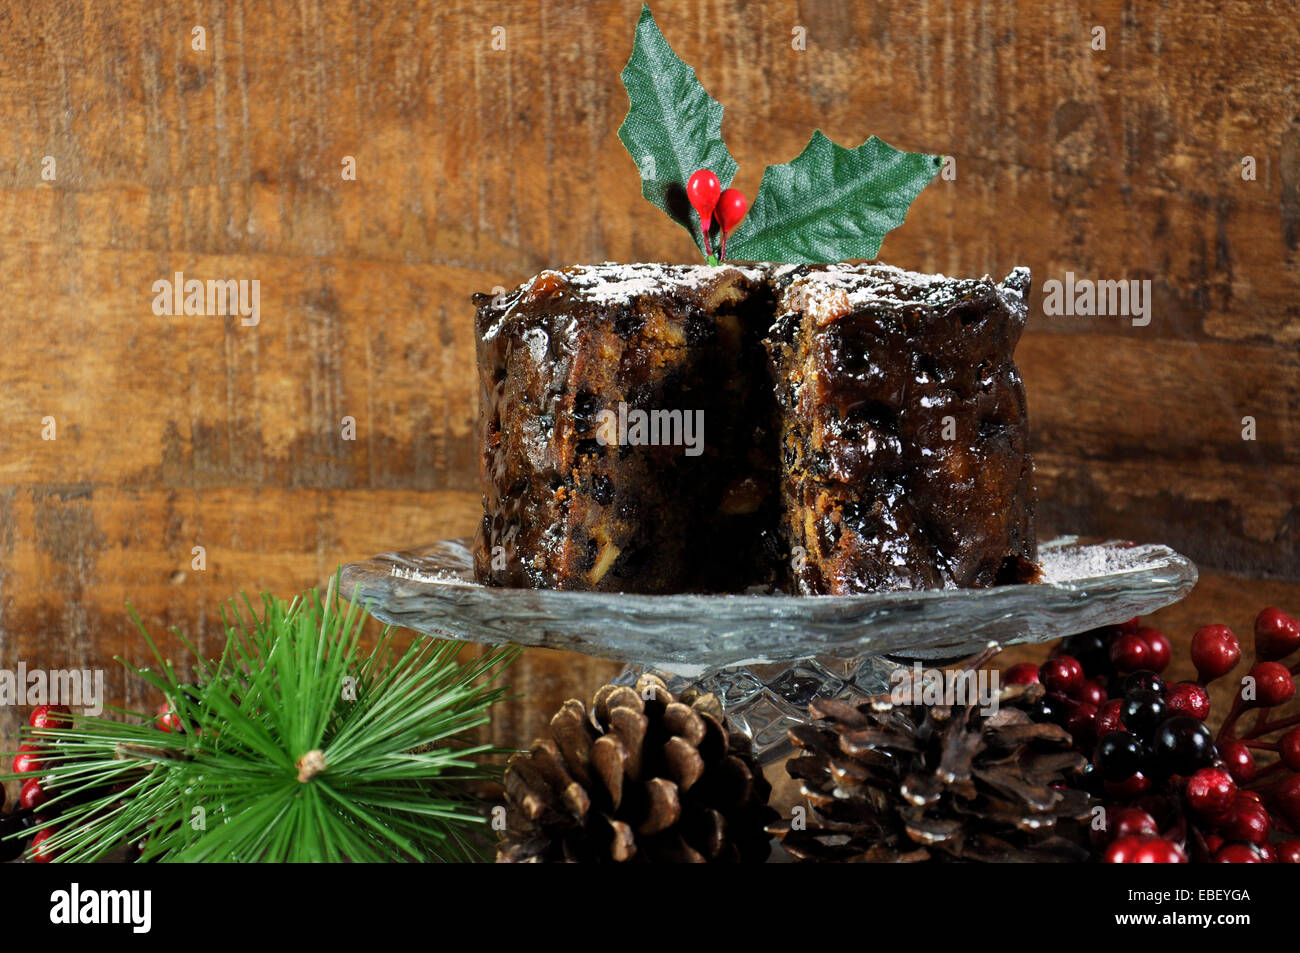 Dark spicy rich Christmas fruit cake in traditional country style wood background setting. Stock Photo